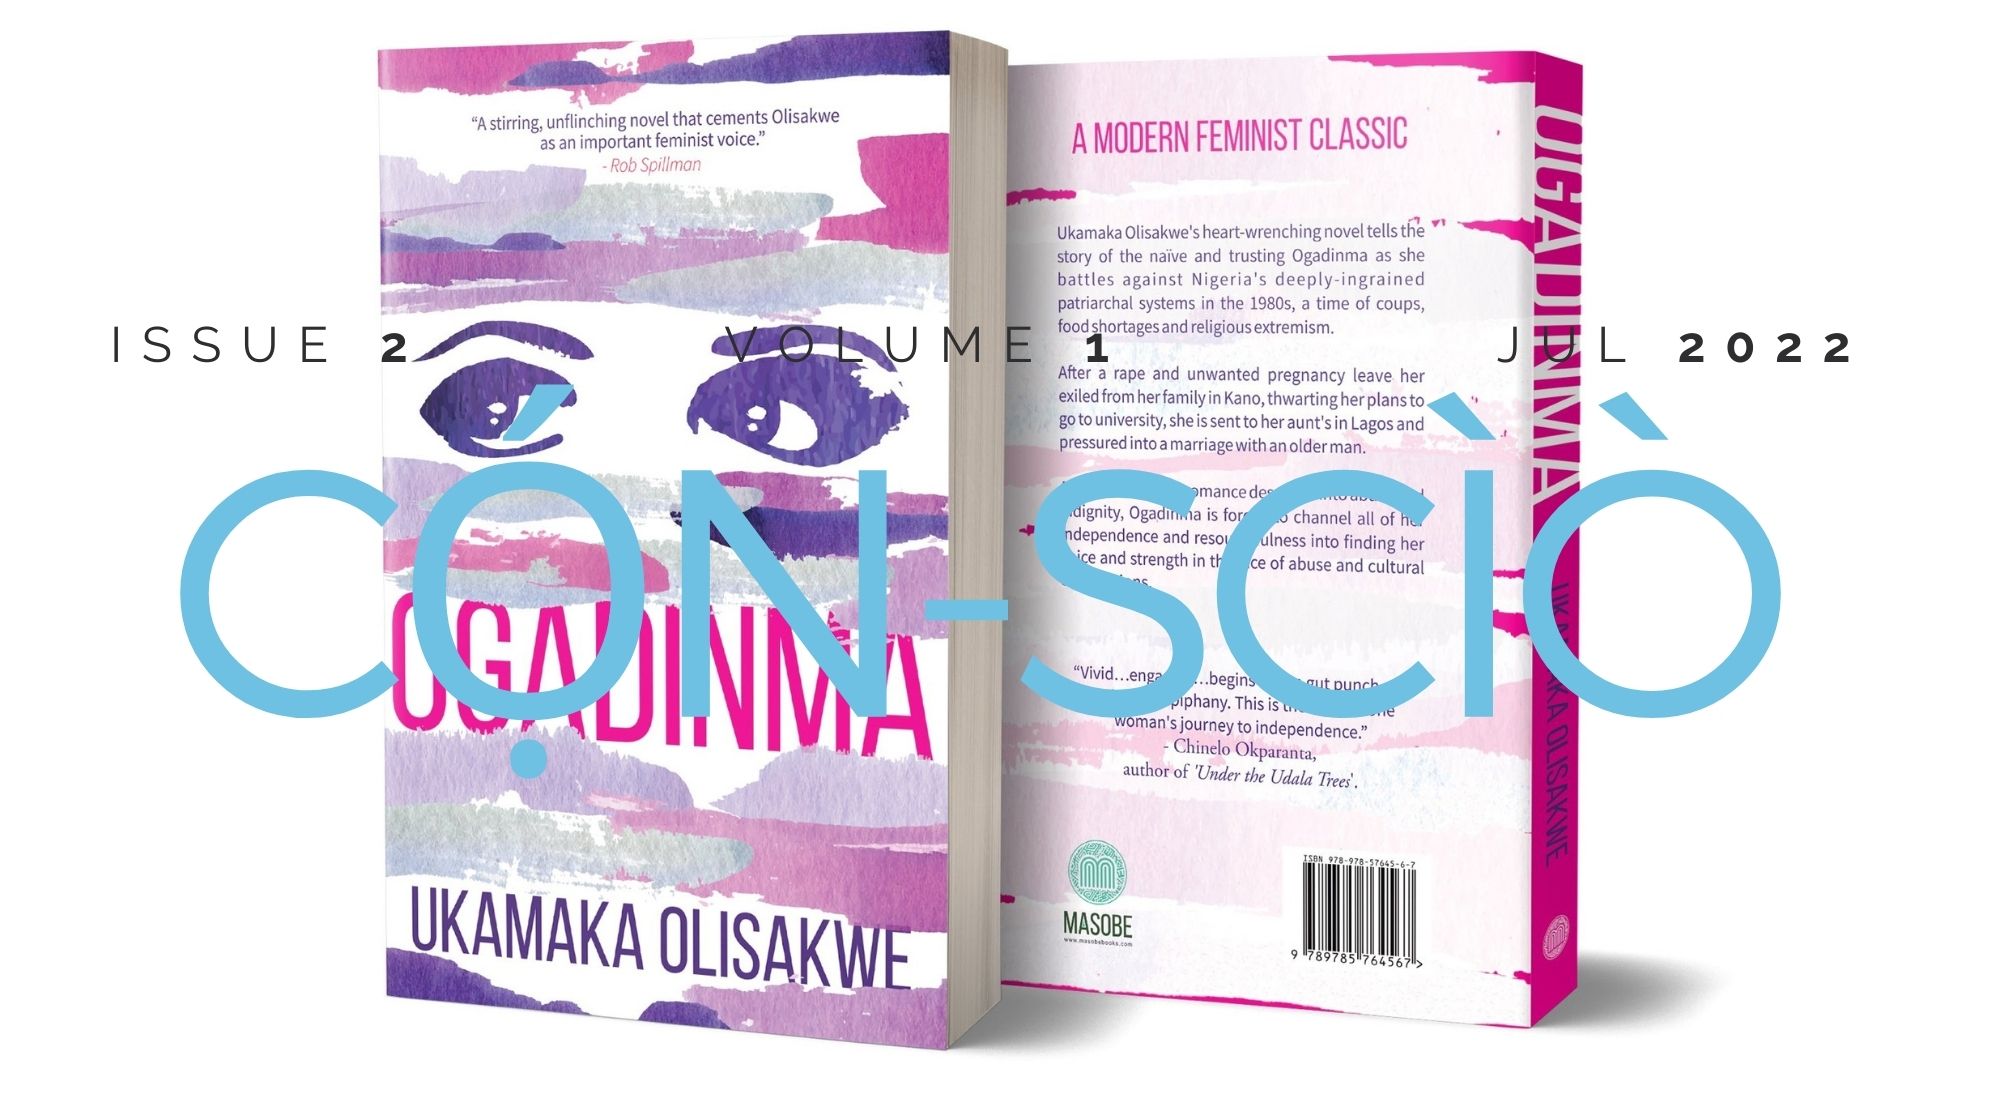 THE FEMINIST BURDEN: ATTAINING INDEPENDENCE ON THE WINGS OF UNAPOLOGETIC REBELLION | a Review Of Ukamaka Olisakwe’s “Ogadinma Or, Everything Will Be All Right” by Ehi-kowoicho Ogwiji